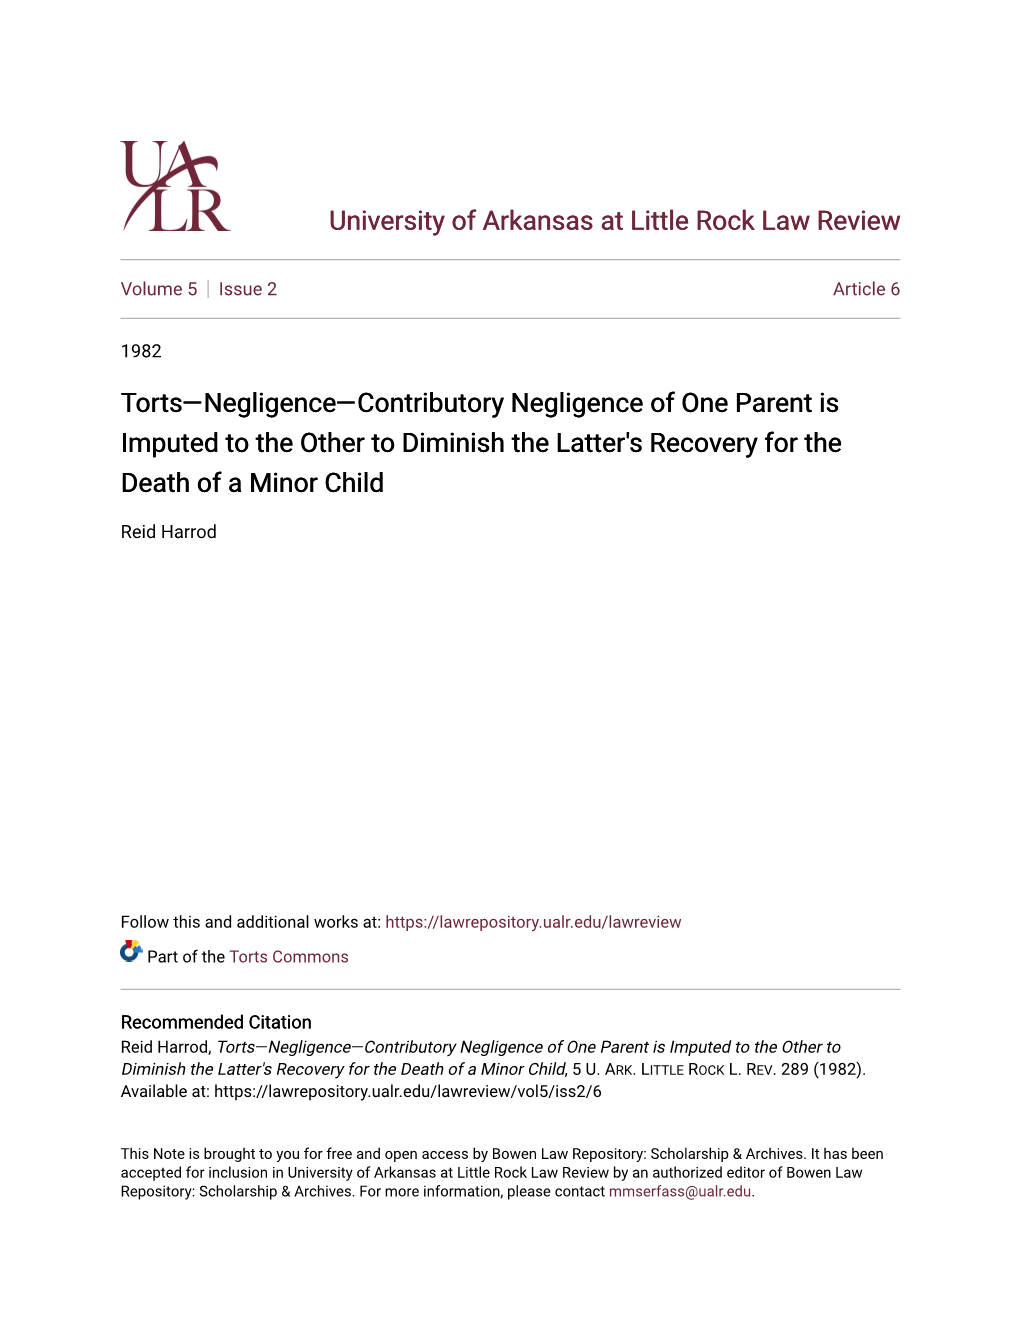 Torts—Negligence—Contributory Negligence of One Parent Is Imputed to the Other to Diminish the Latter's Recovery for the Death of a Minor Child